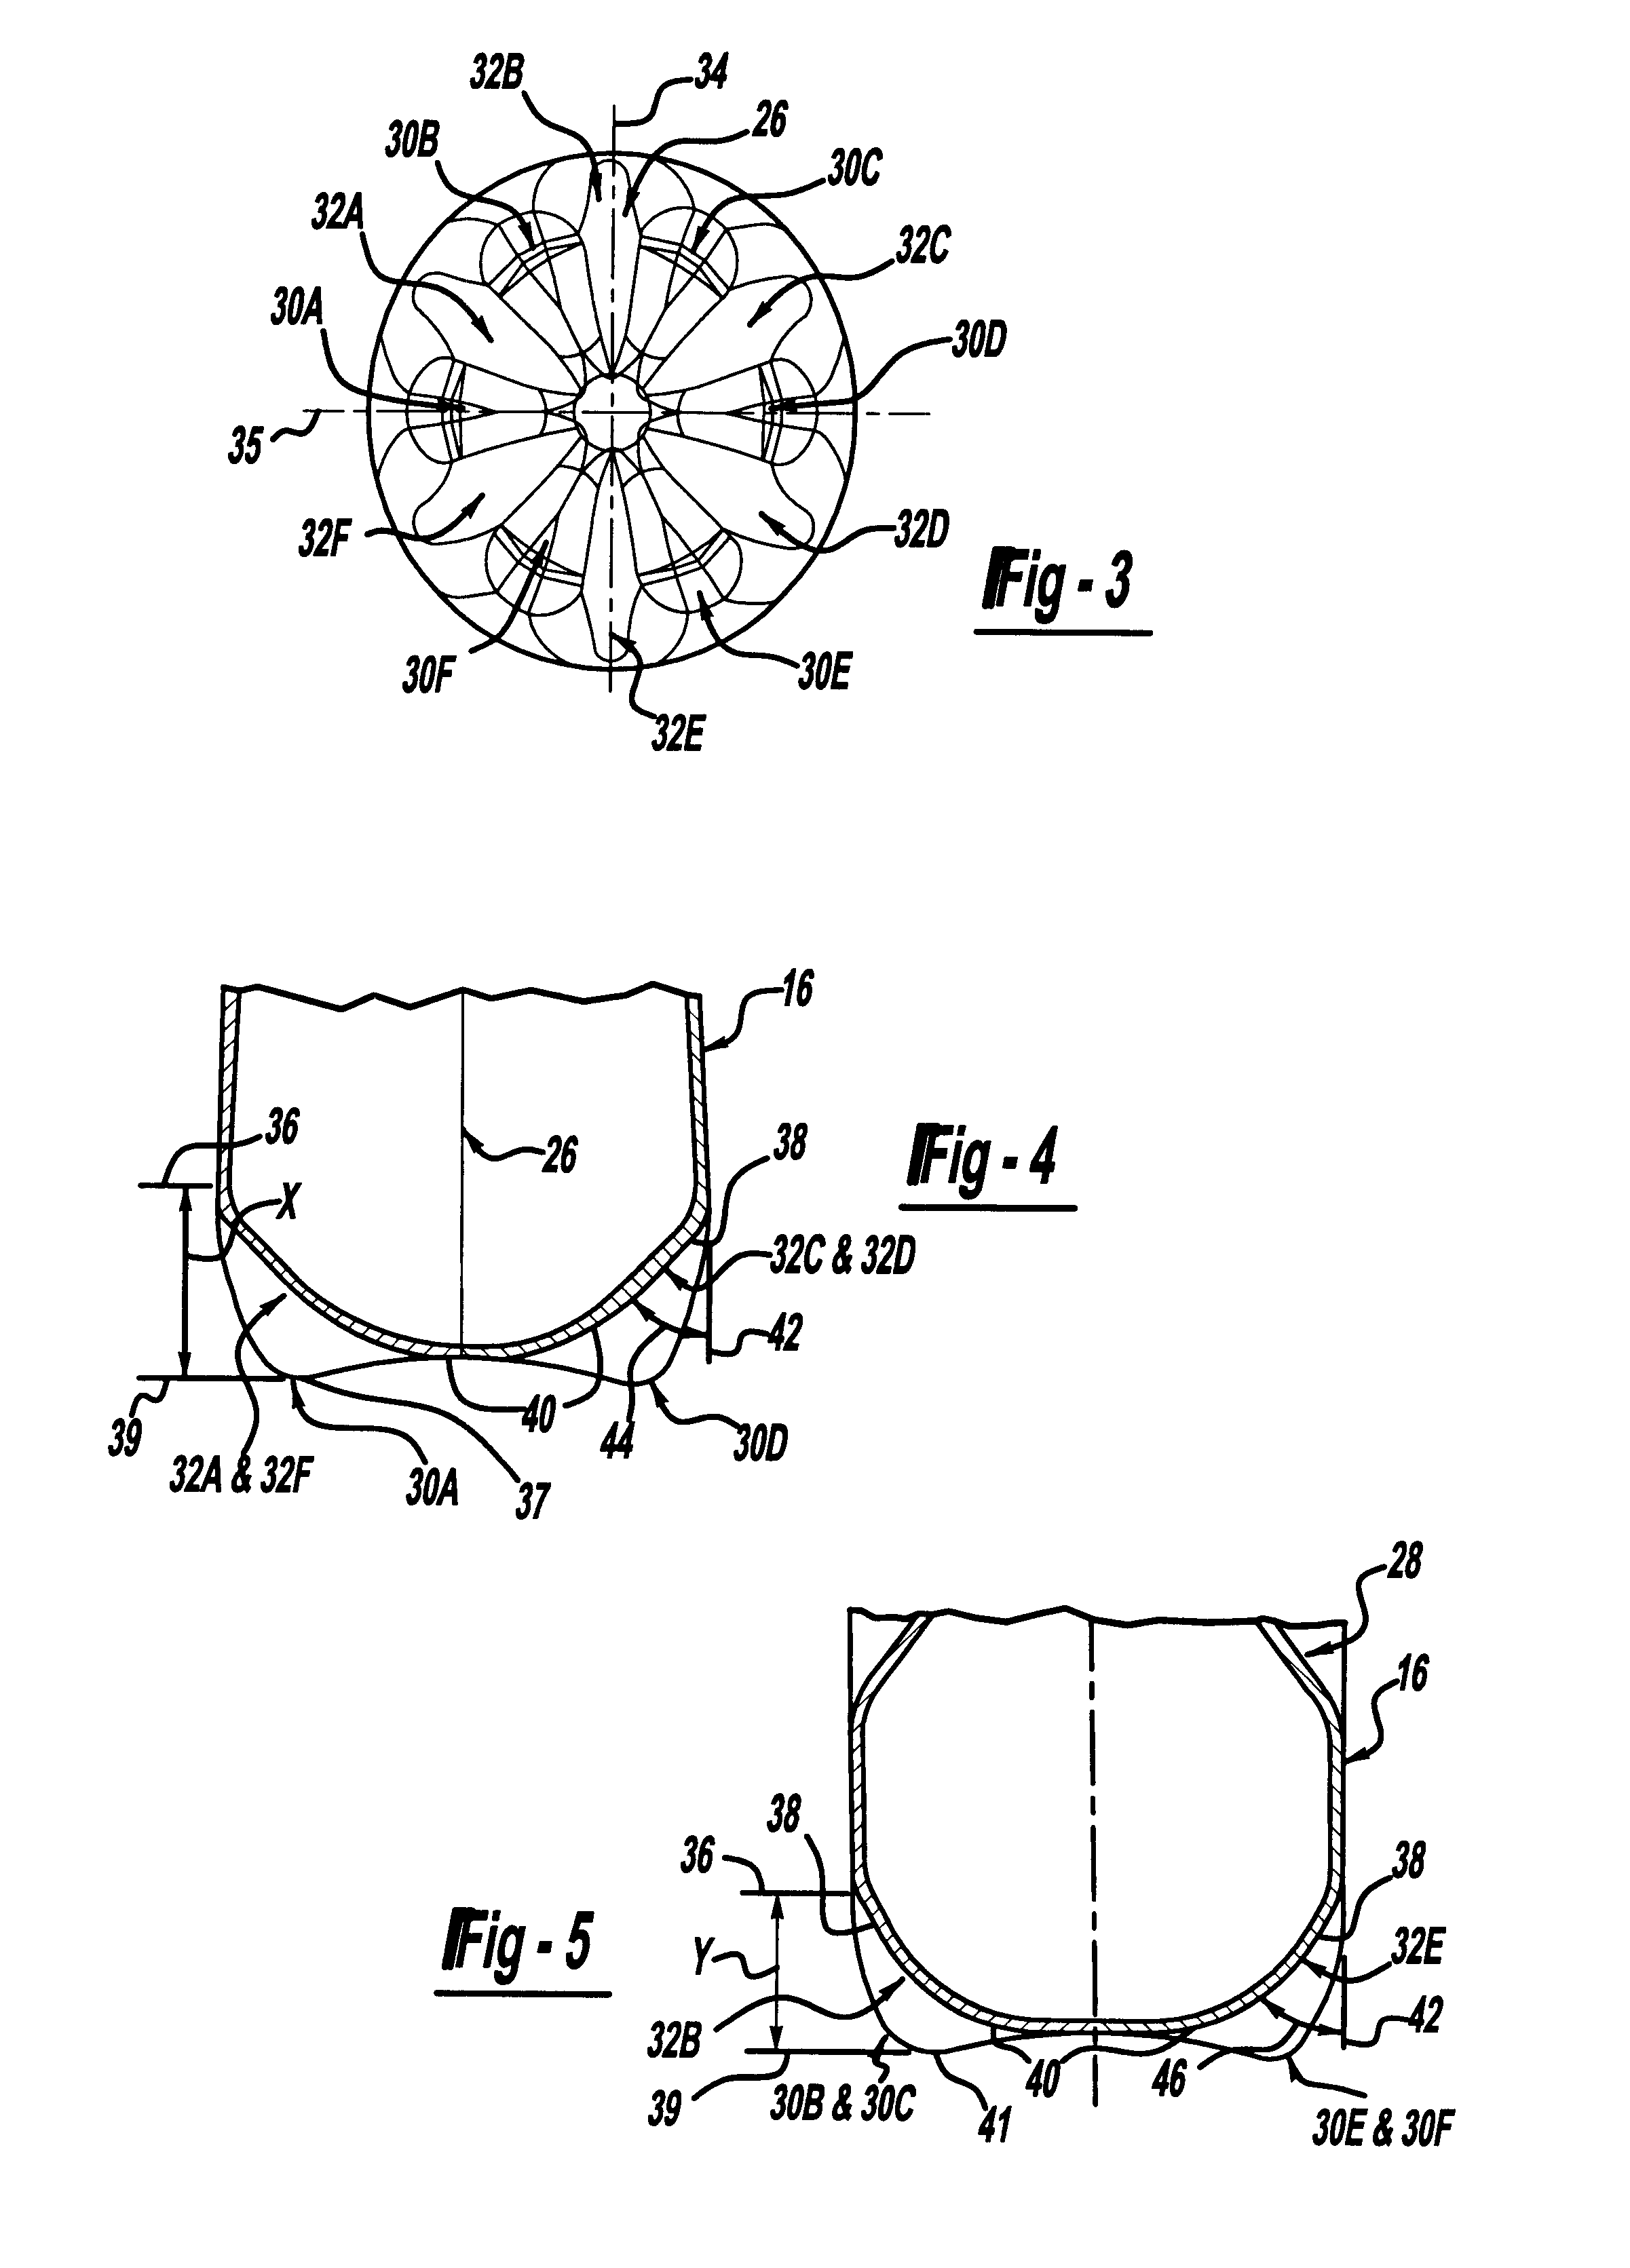 Non-rocking, webbed container for carbonated beverages